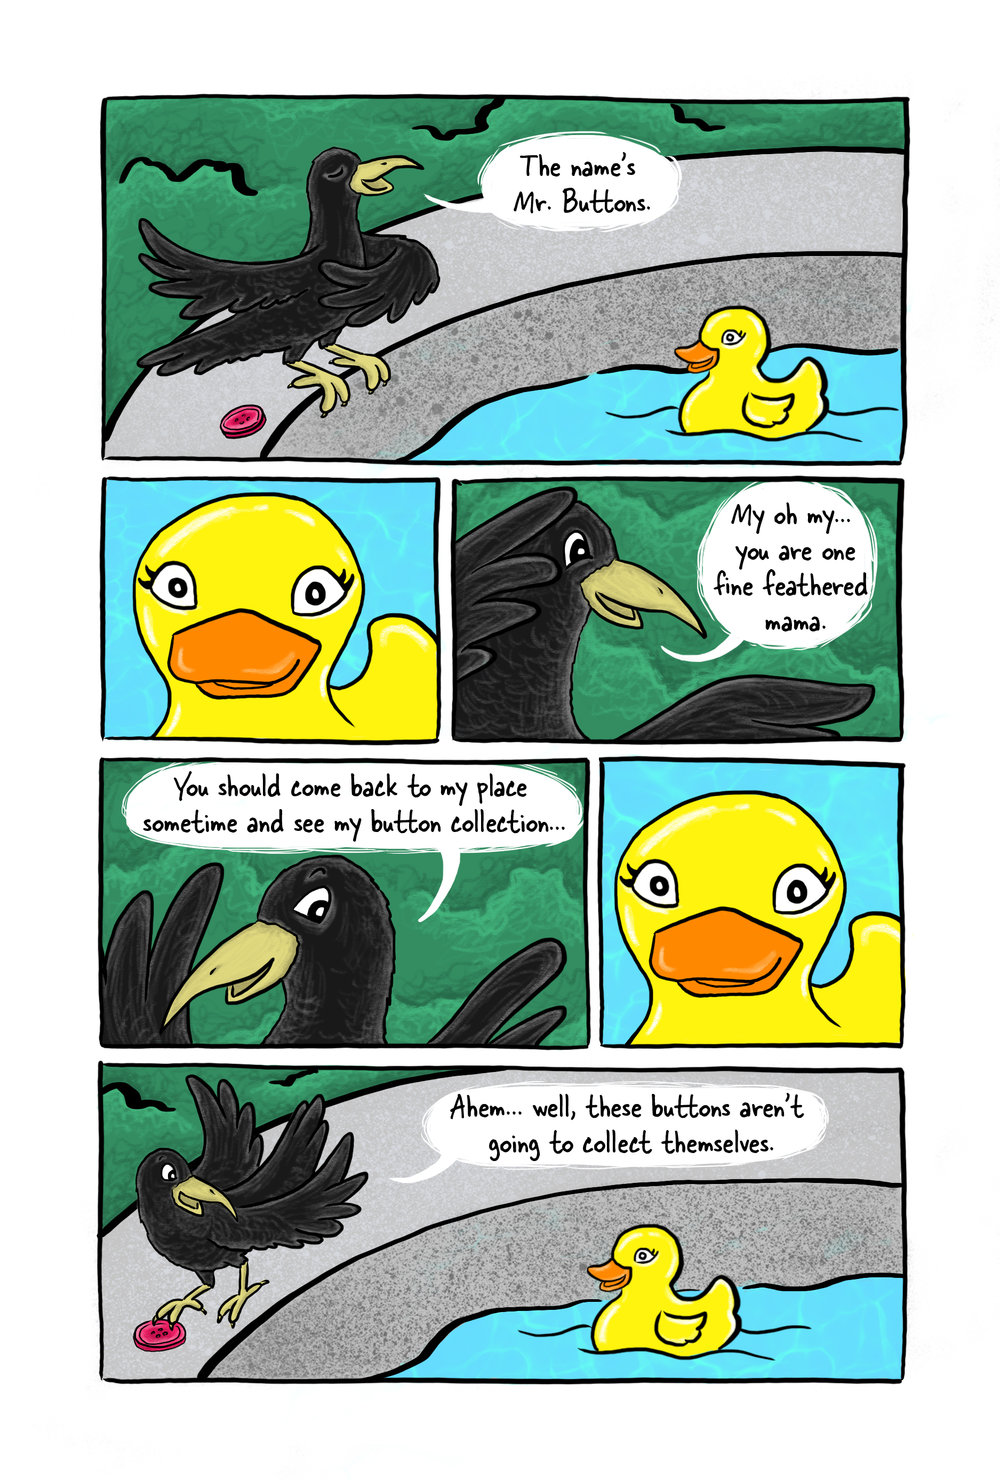 Page 2 Mr. Buttons introduces himself to the duck, who he thinks is real